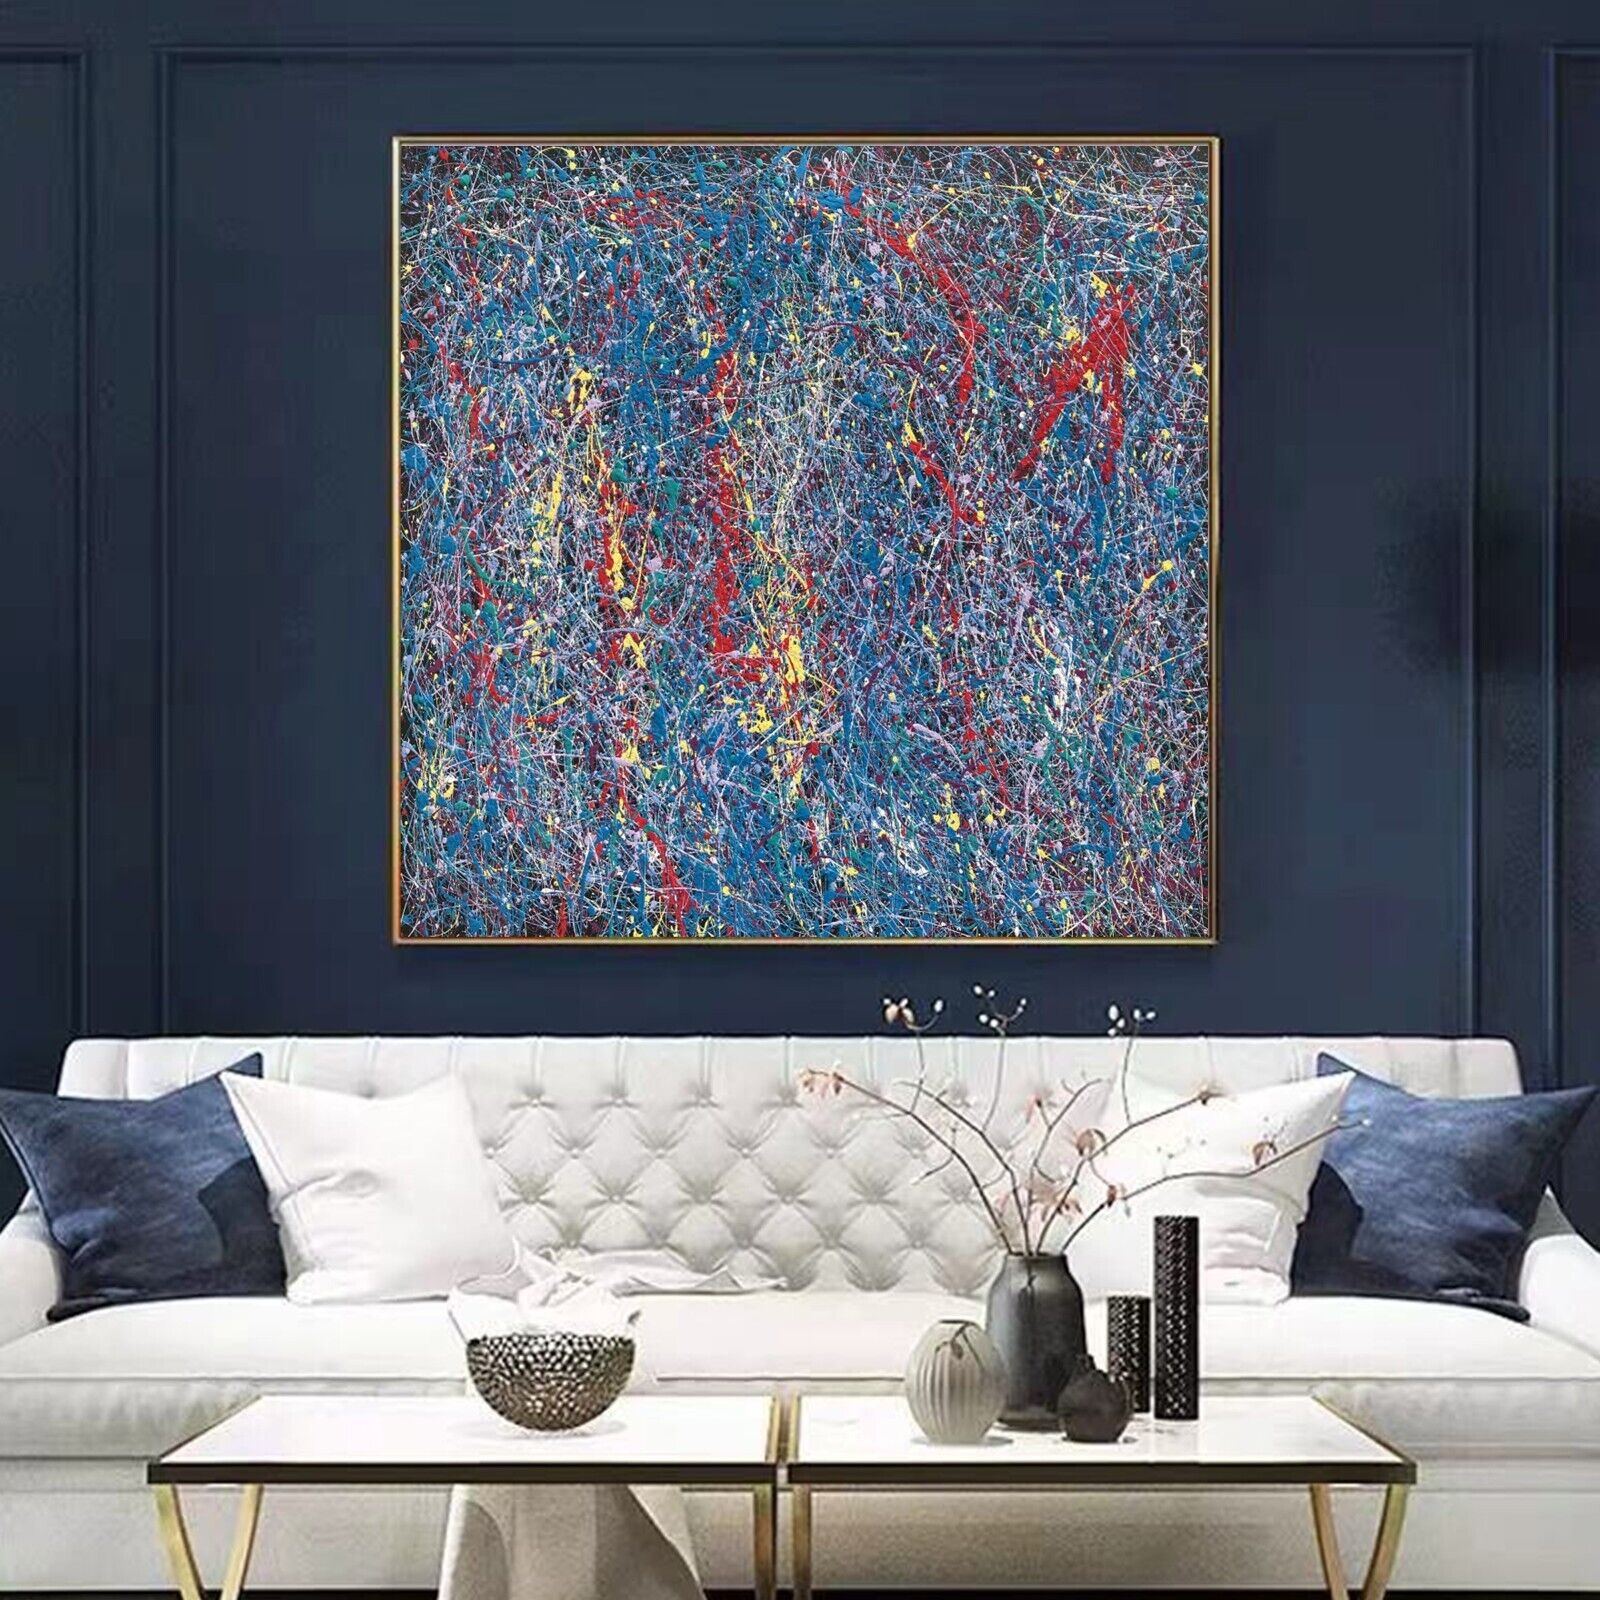 Sale Abstract Caribbean Red 40H X 40W Framed Canvas Giclee Winford $695 Now $395